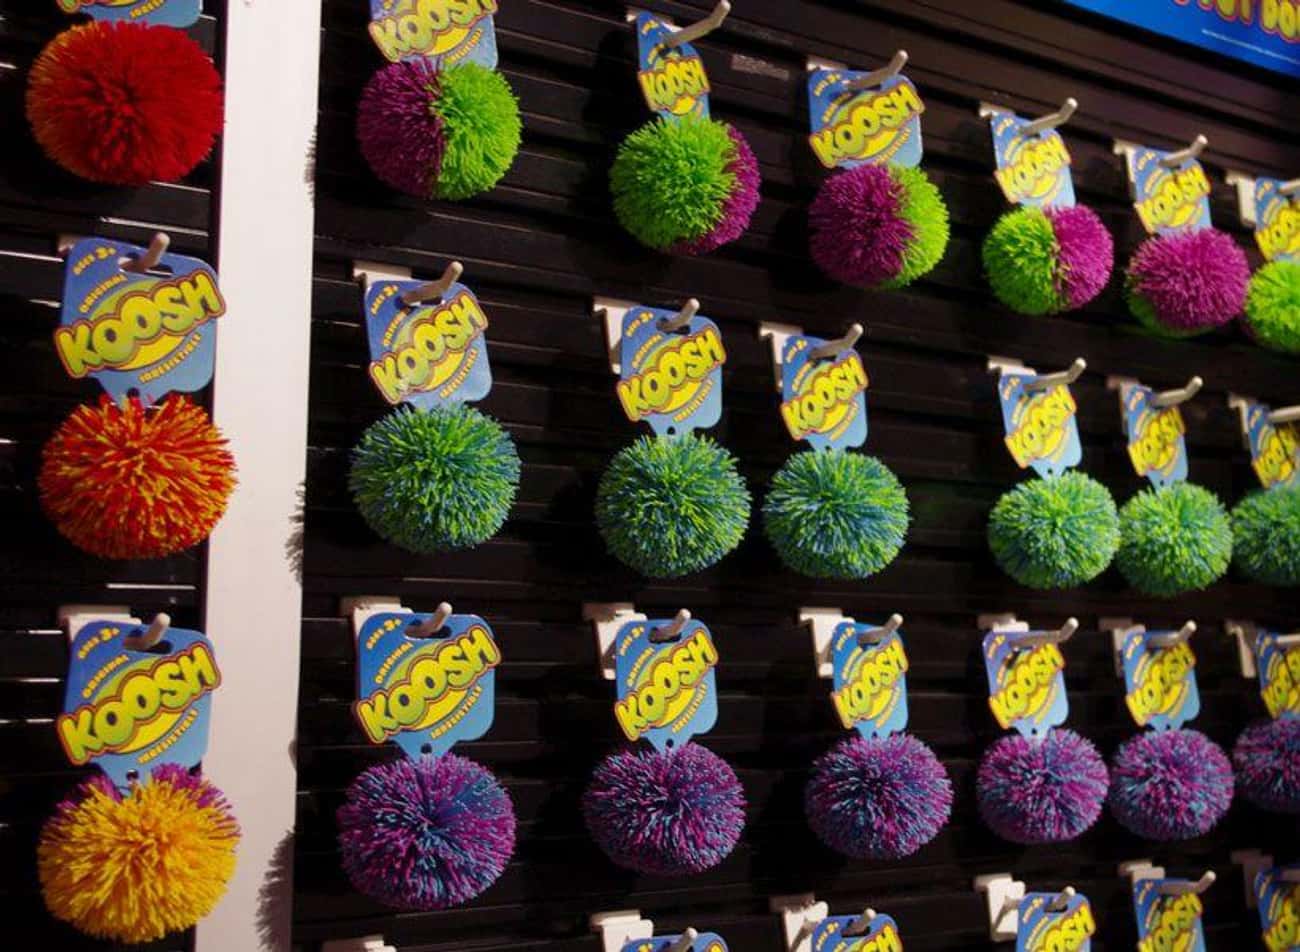 The Koosh Ball Prototype Was A Bundle Of Rubber Bands